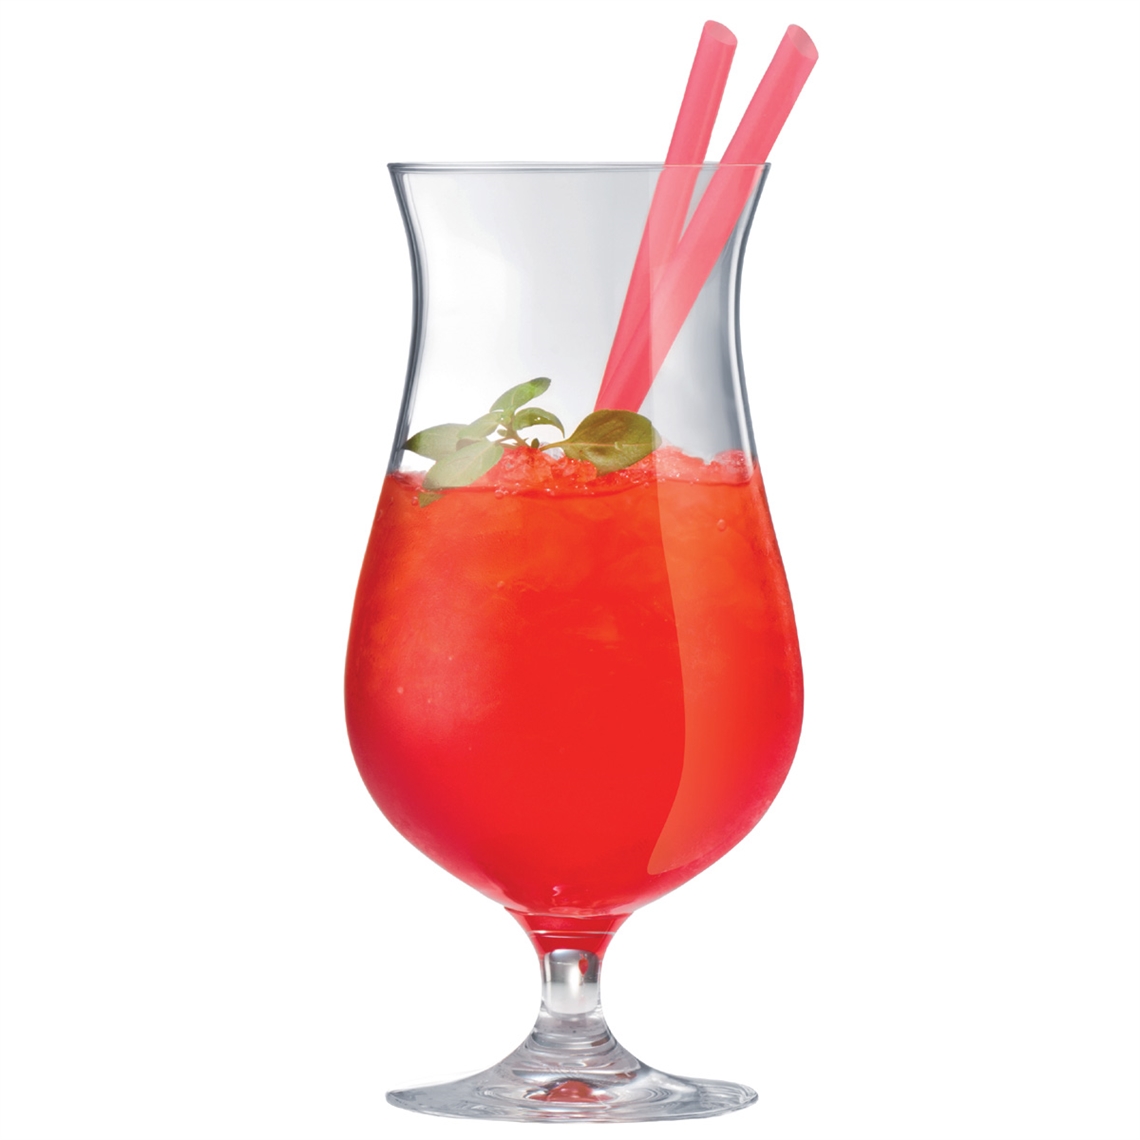 View more sydonios from our Cocktail Glasses range